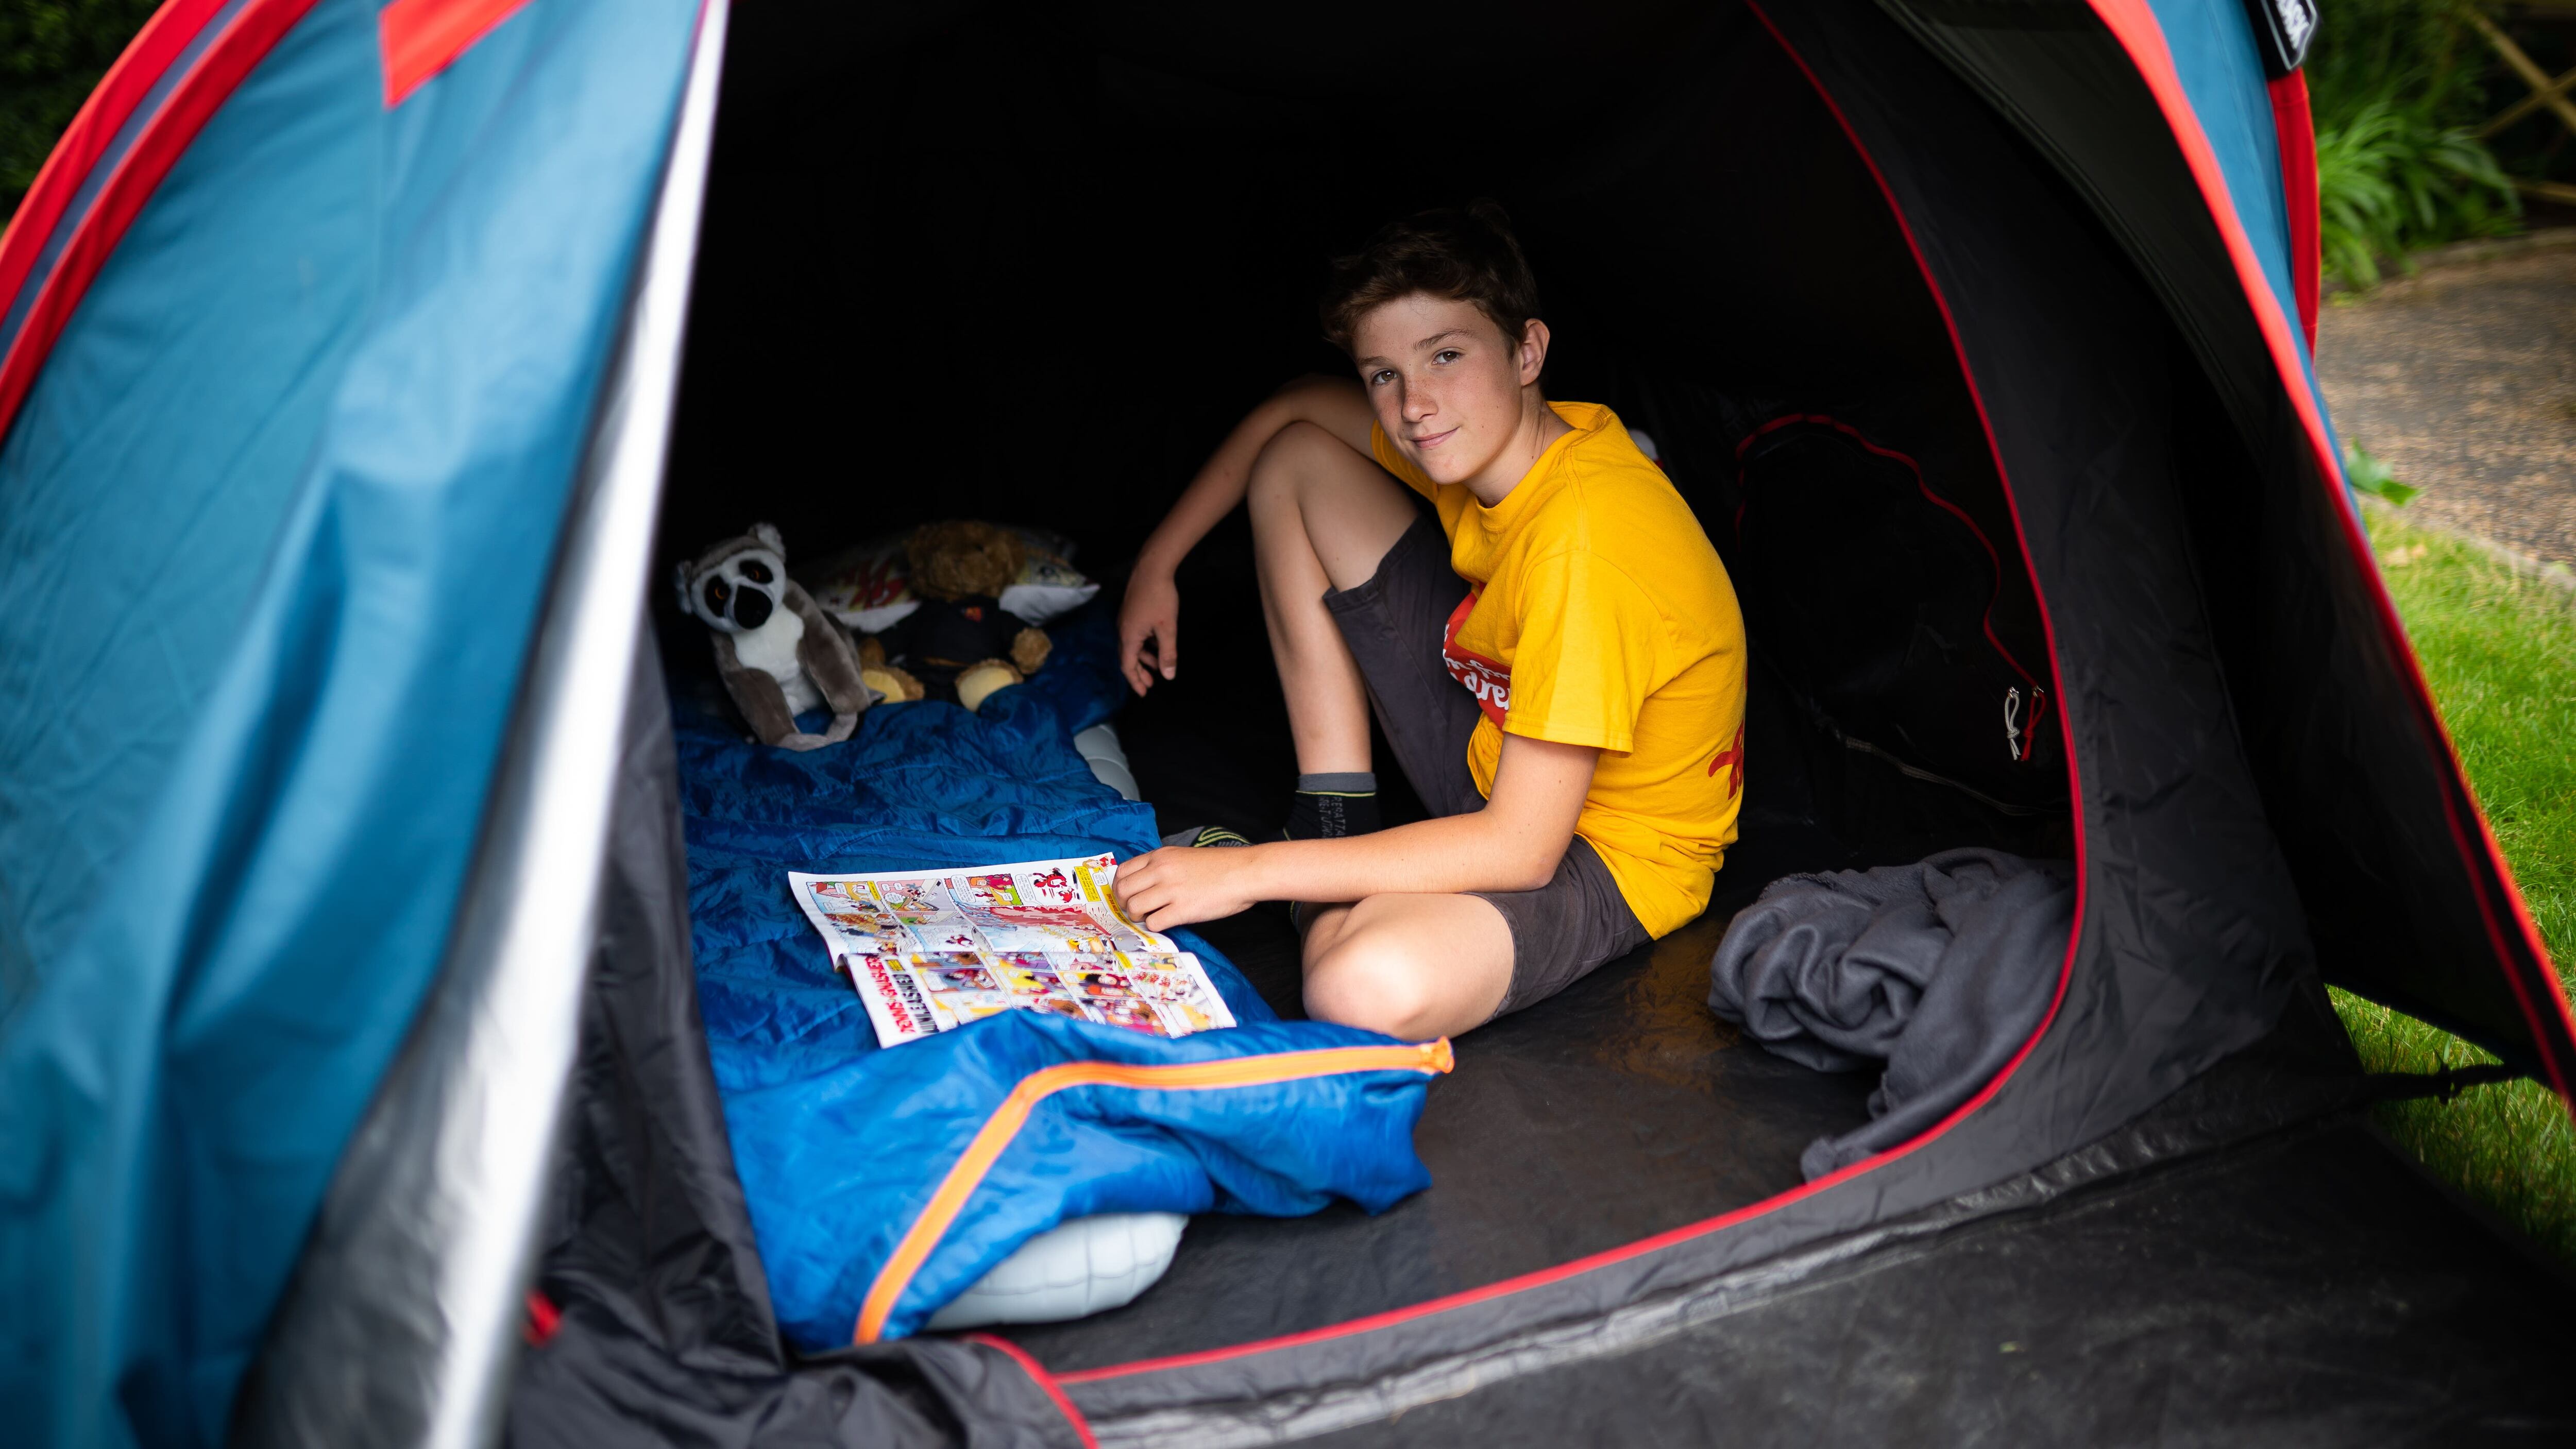 ‘Boy in the tent’ Max Woosey, 13, has raised £700,000 for the North Devon Hospice since March 2020.